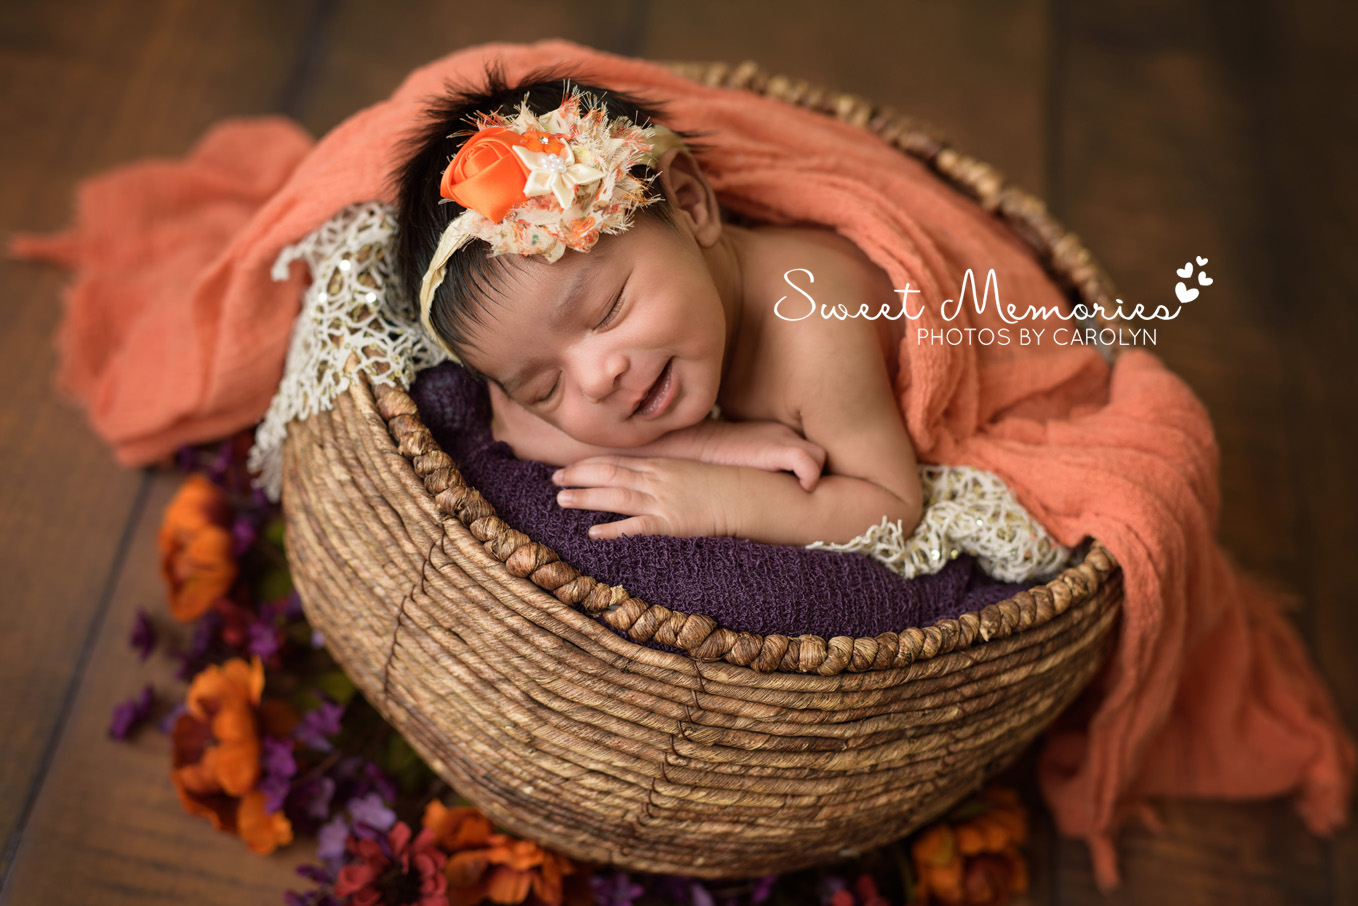 Sweet Memories Photos by Carolyn | Newtown PA | Bucks County Montgomery County Newborn Infant Baby Photographer | Indian newborn baby girl smiling in basket | purple orange gold fall flowers